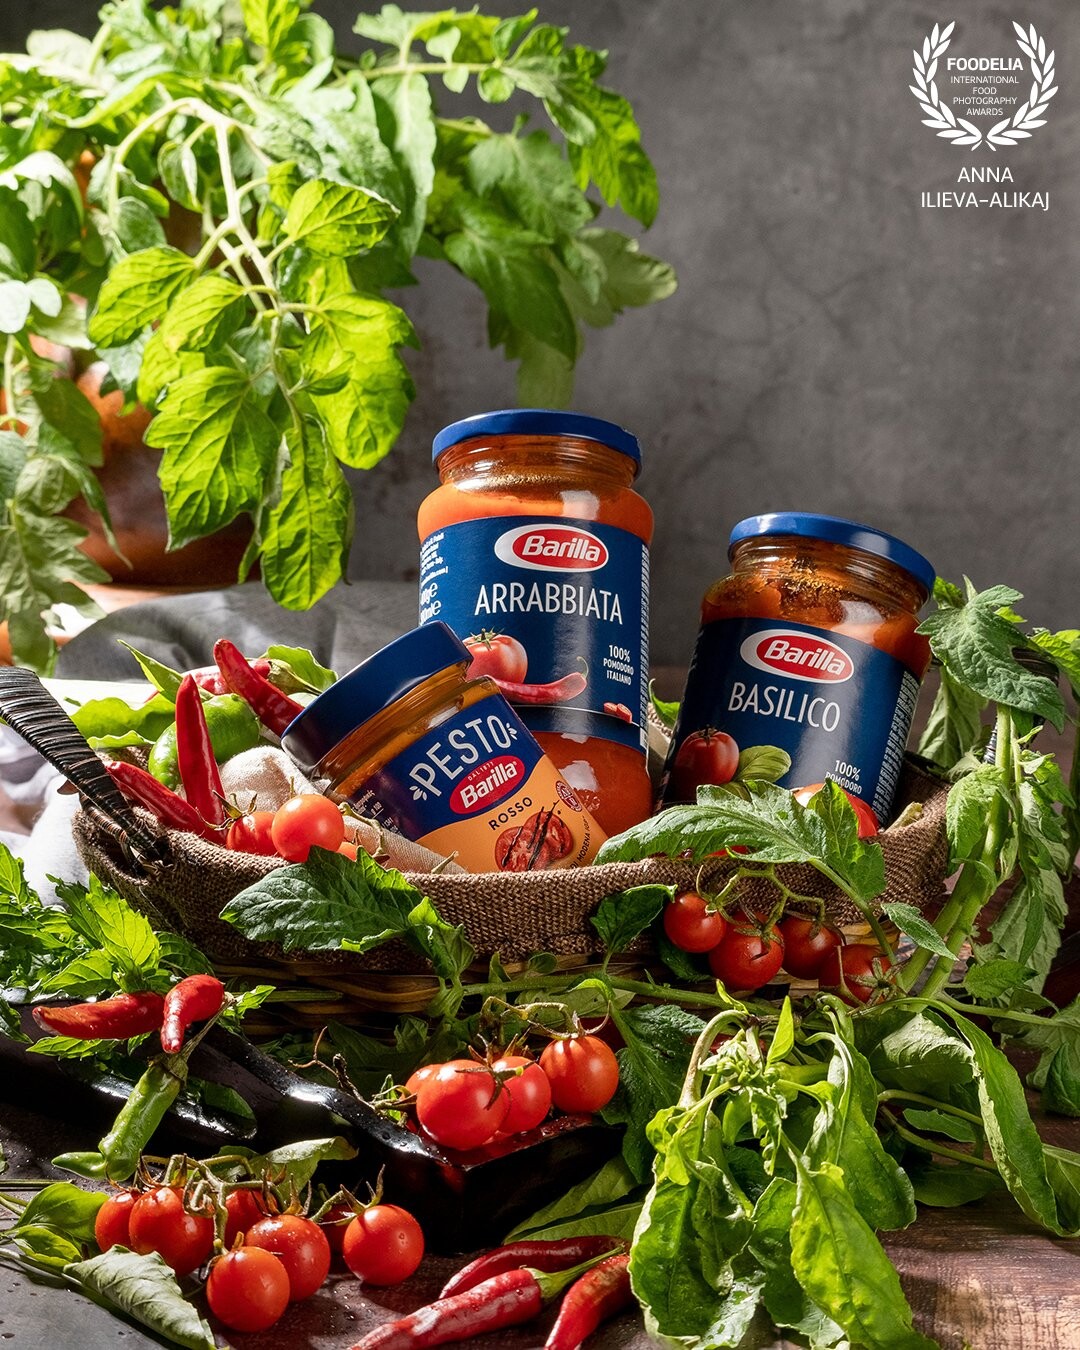 Looking for a rustic, yet simple presentation of these tomato-based Barilla products. The abundance of the harvest bathed in "sunlight" contributed to this genuine and fresh look. Technically I used several studio lights and some reflectors. The use of complementary colors make the product stand out.